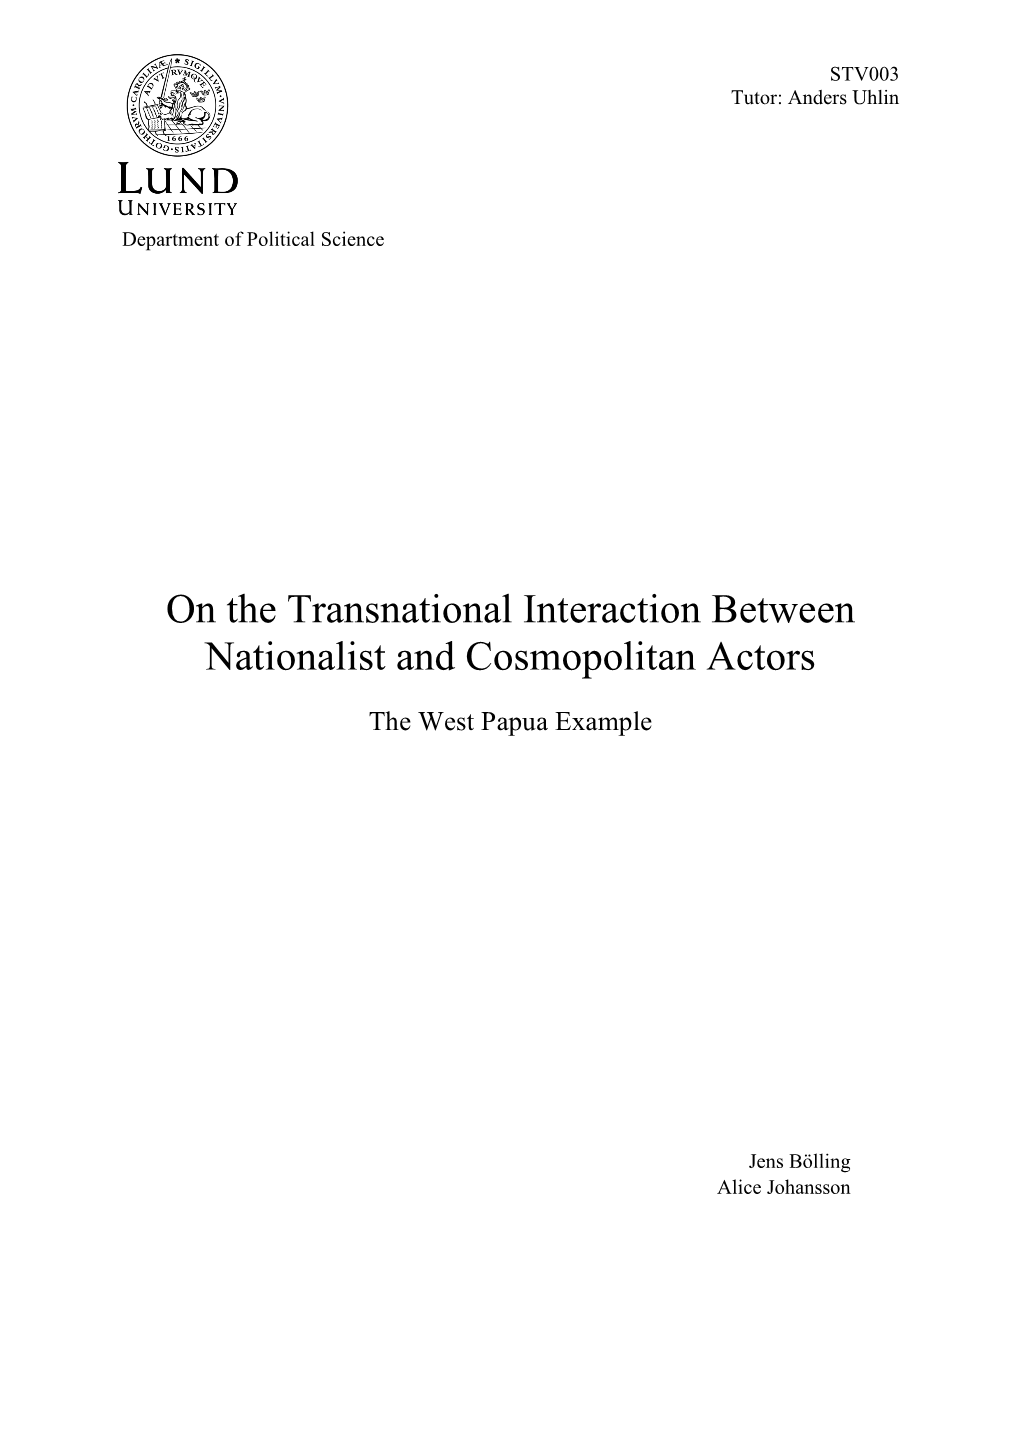 On the Transnational Interaction Between Nationalist and Cosmopolitan Actors